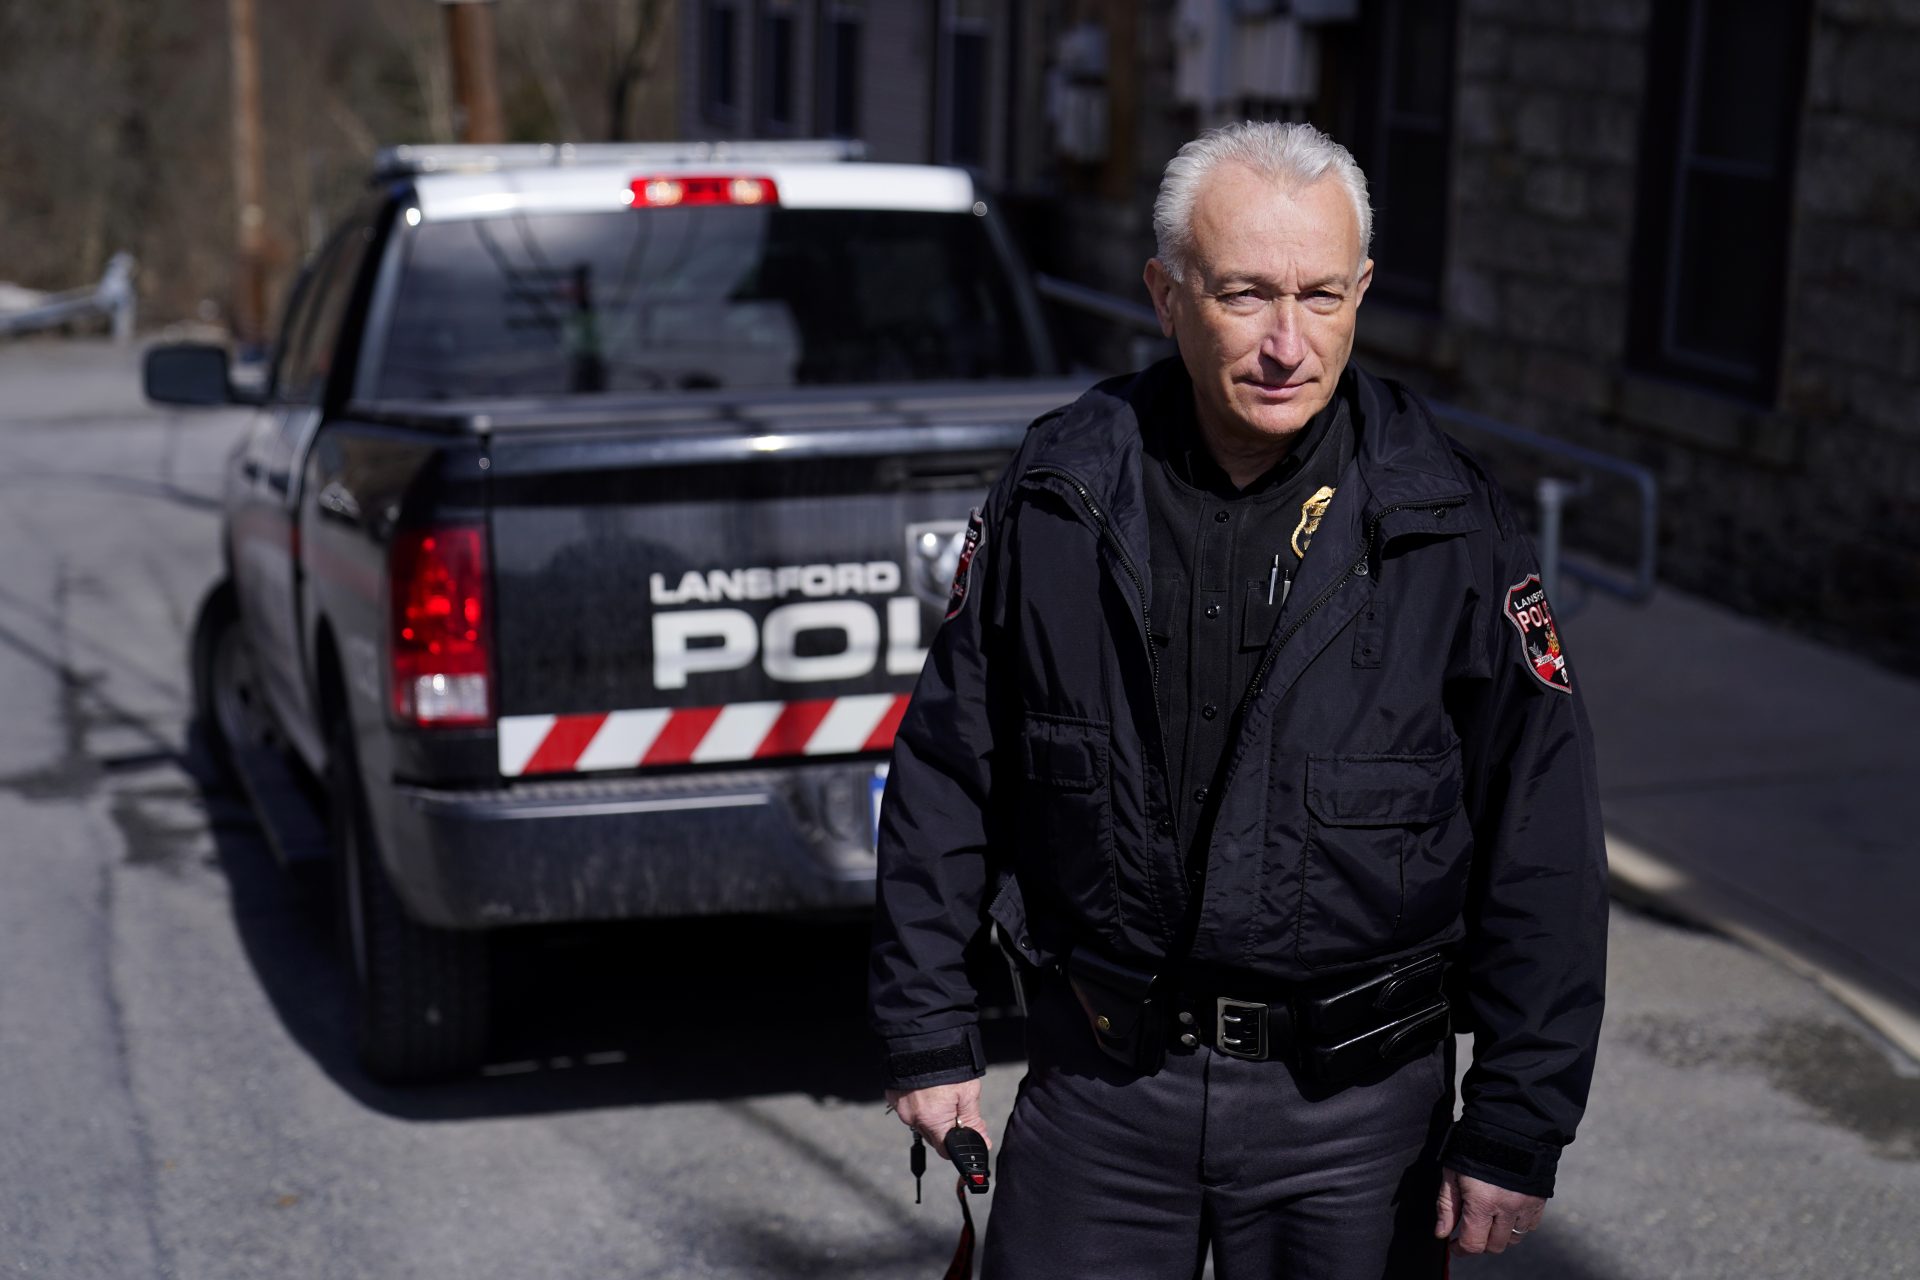 Lansford Police Chief Jack Soberick stands next to his truck, Friday, March 12, 2021, in Lansford, Pa. On May 26, 2020, police found 9-year-old Ava Lerario; her mother, Ashley Belson, and Ava's father, Marc Lerario, fatally shot inside their home. Soberick was the first to respond to the scene. "I don't believe this would have happened this way if not for the pandemic pushing him beyond the brink," Soberick said of Marc Lerario. "I wish Marc would have gotten treatment for the bipolar disorder."